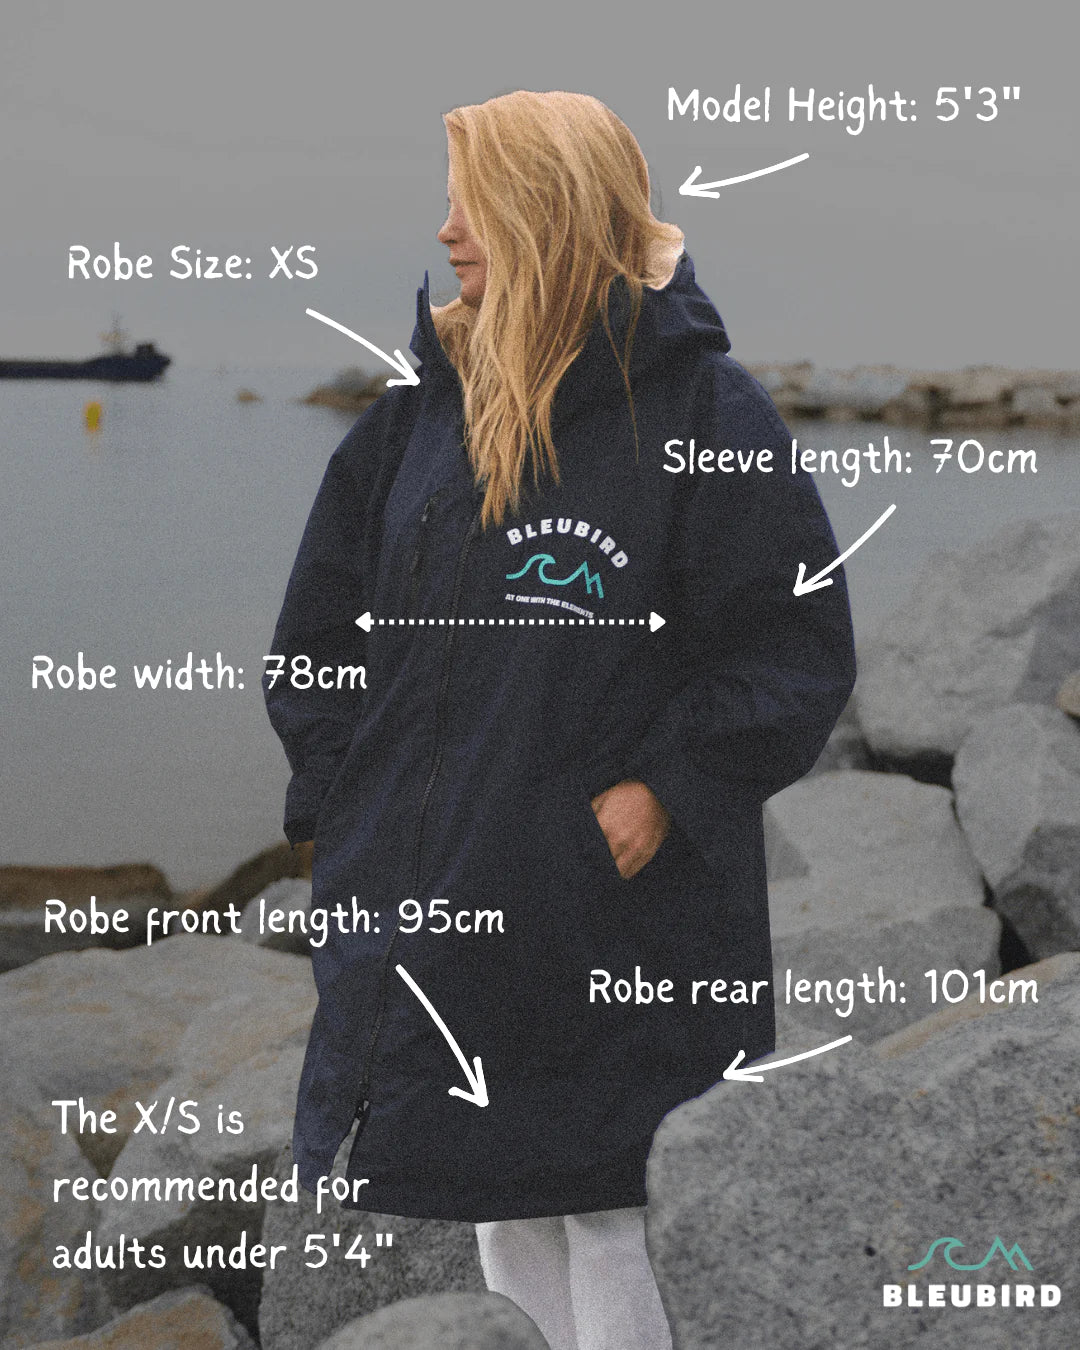 The Nordic Robe - Coral